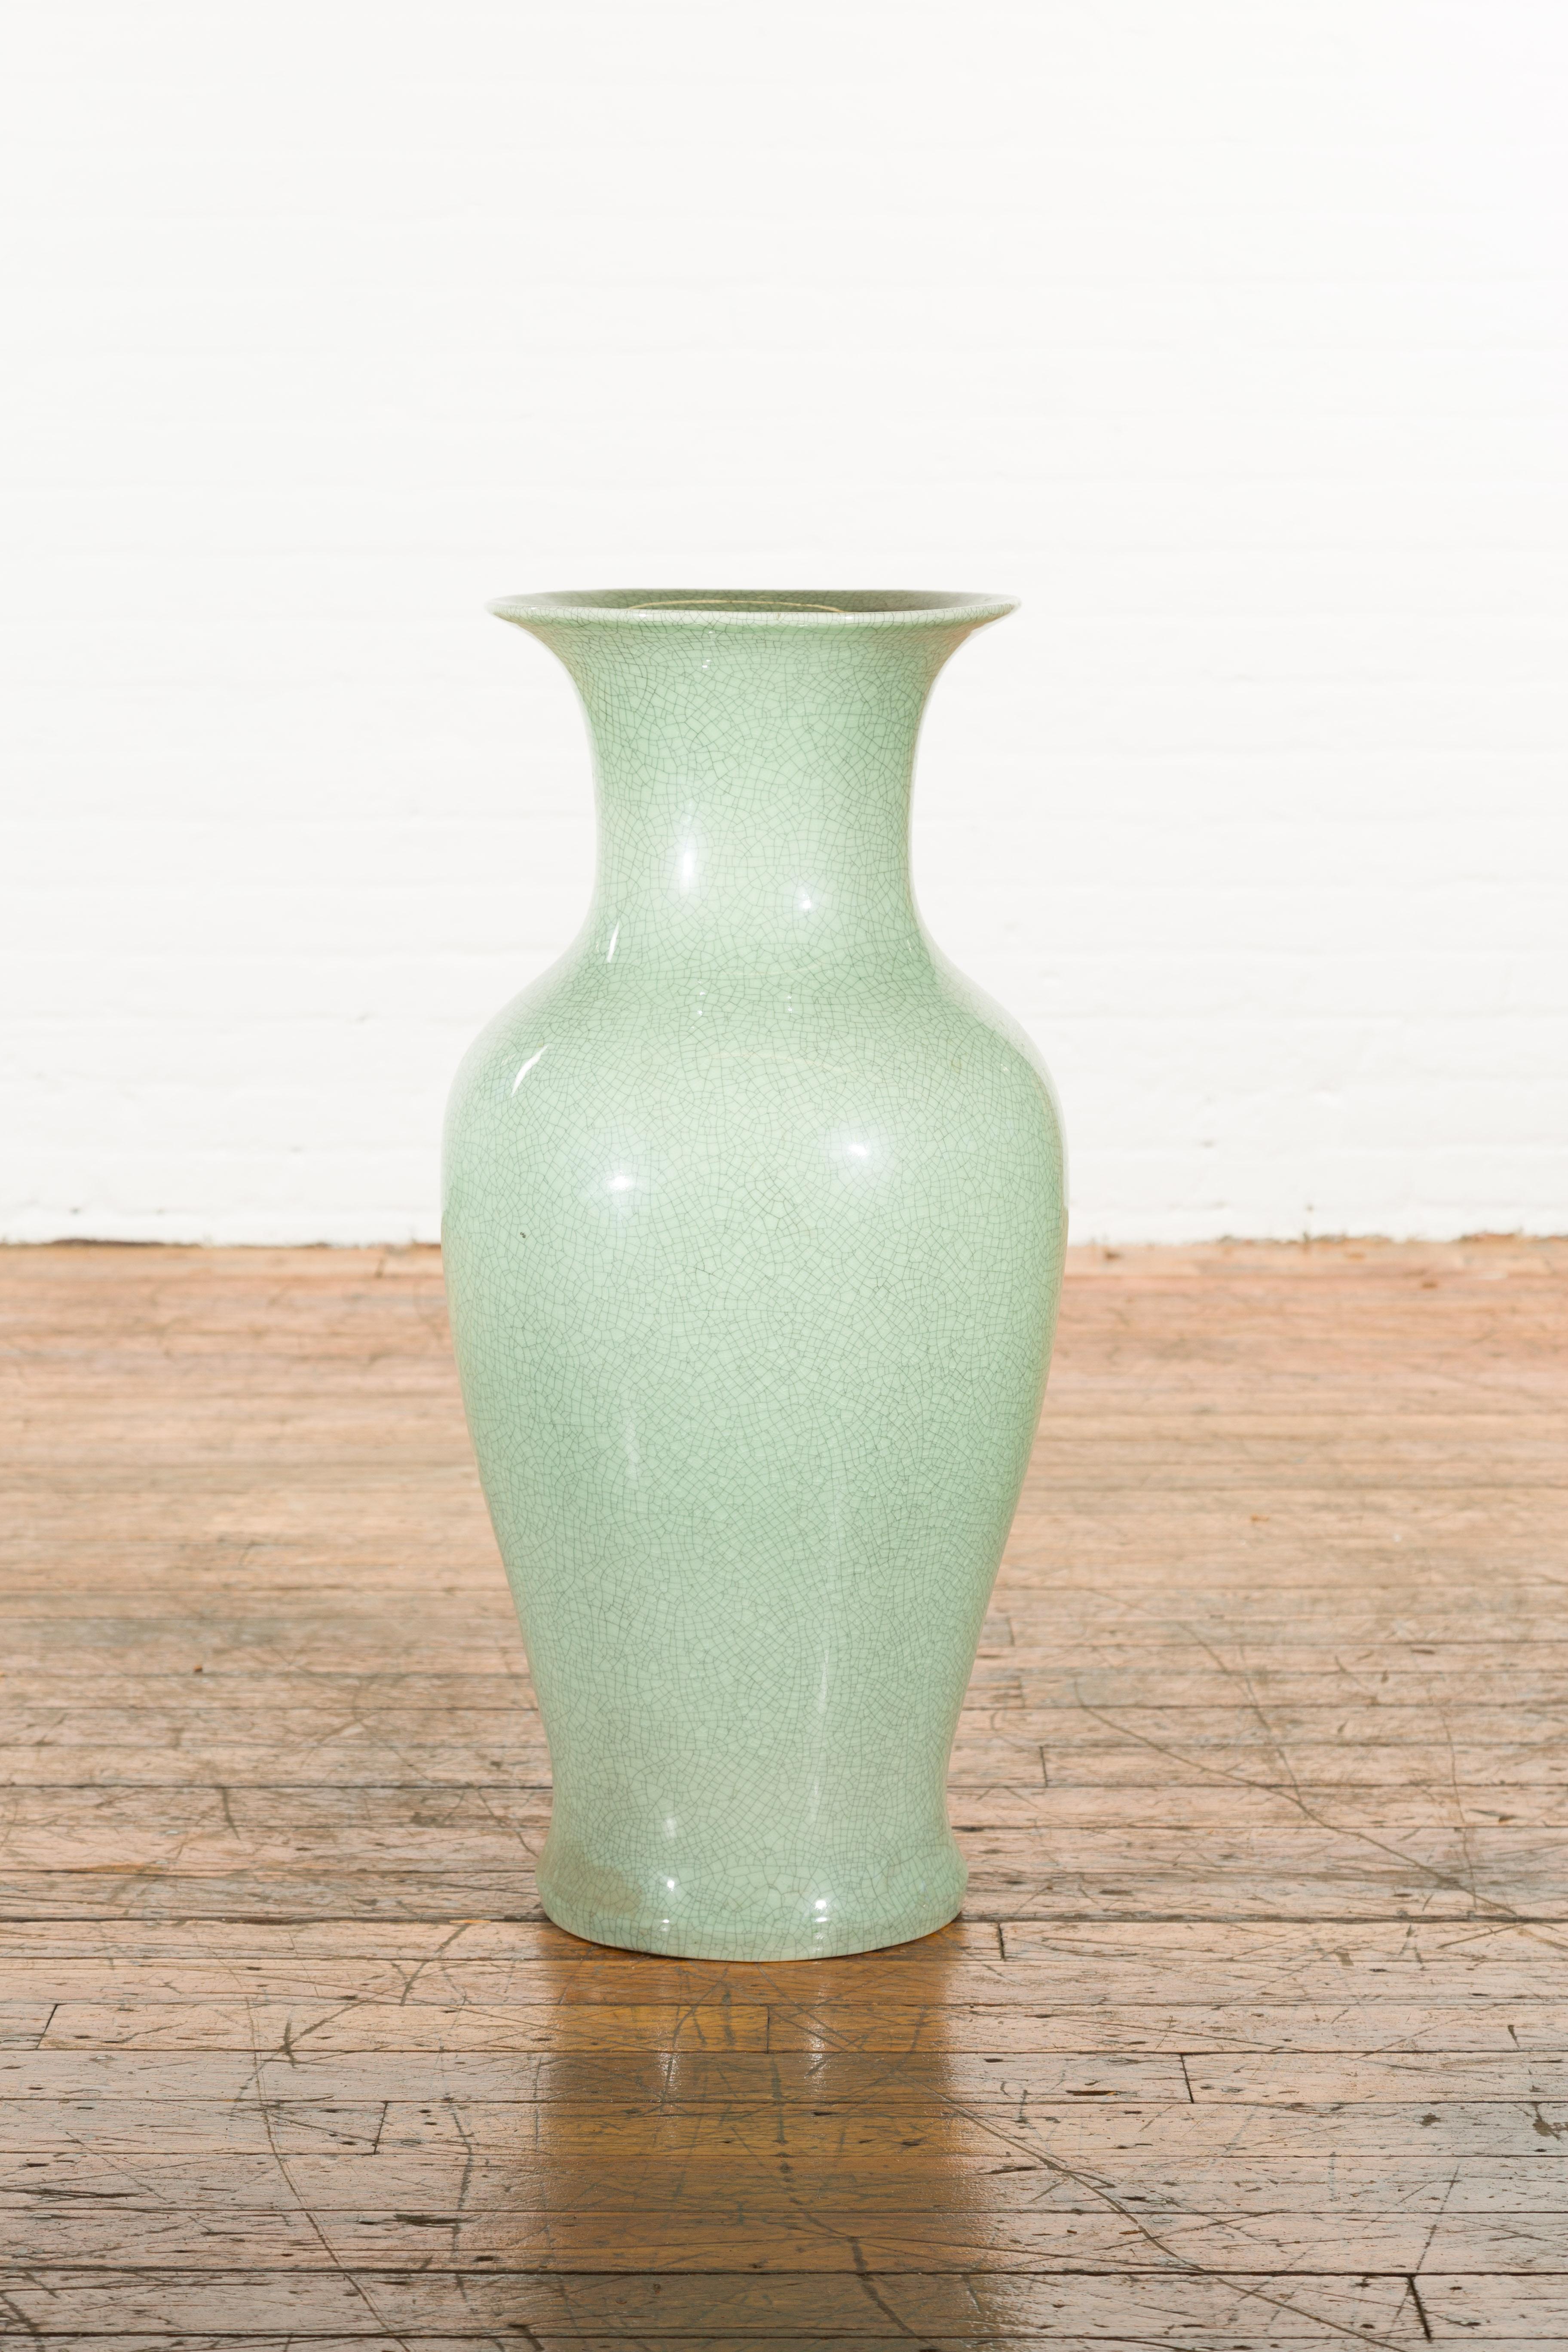 A Chinese vintage altar vase from the mid 20th century, with celadon crackle finish and flaring neck. We currently have 3 vases available, priced and sold $1,300 each. Created in China during the midcentury period, this tall altar vase charms us